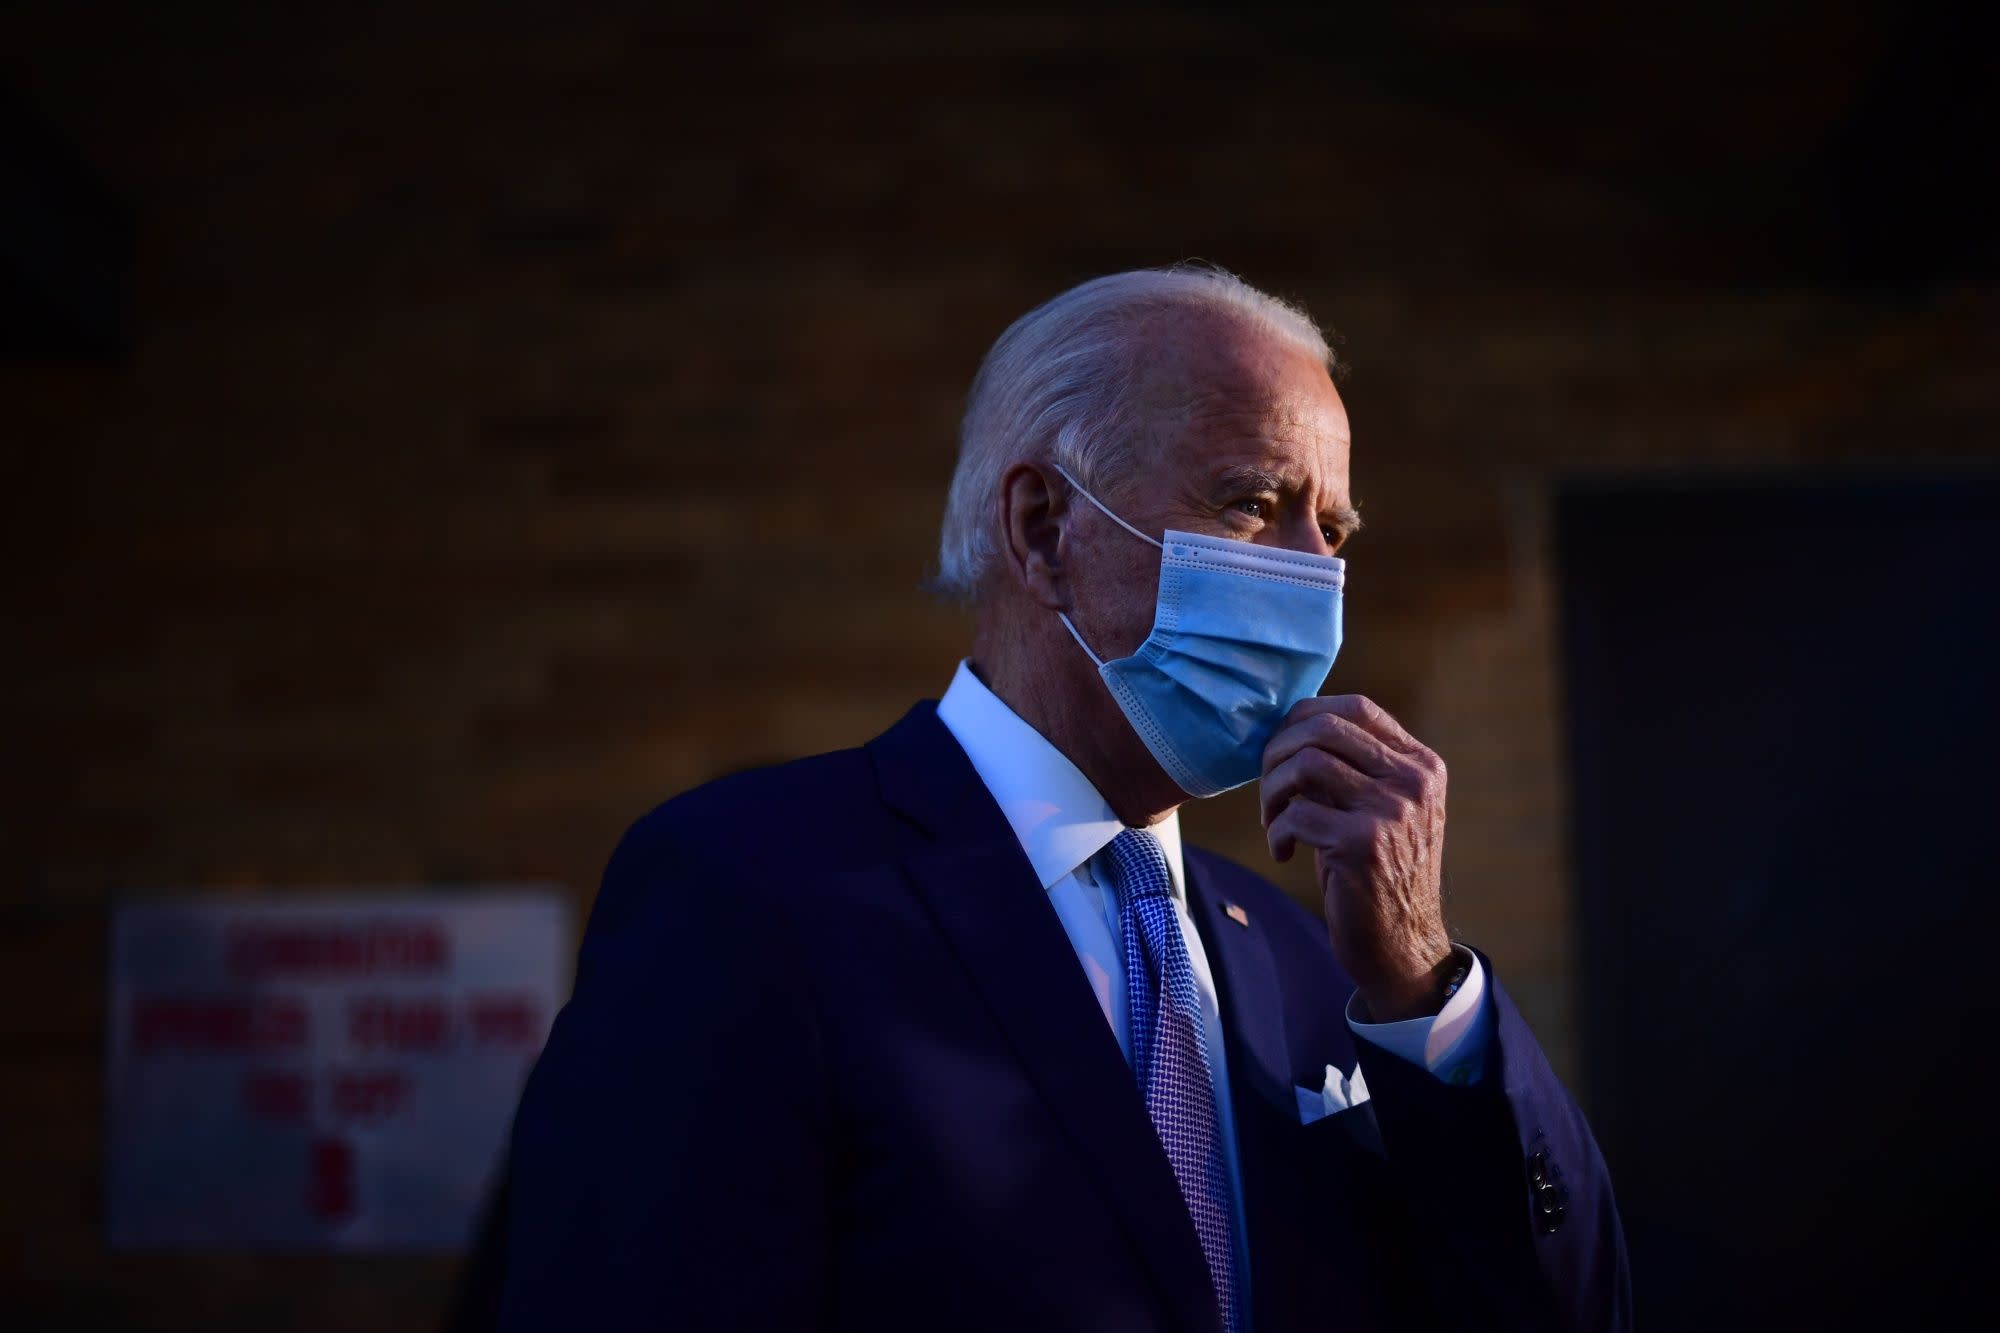 Wall Street’s Biden Fans Greet His Economy Team With Relief